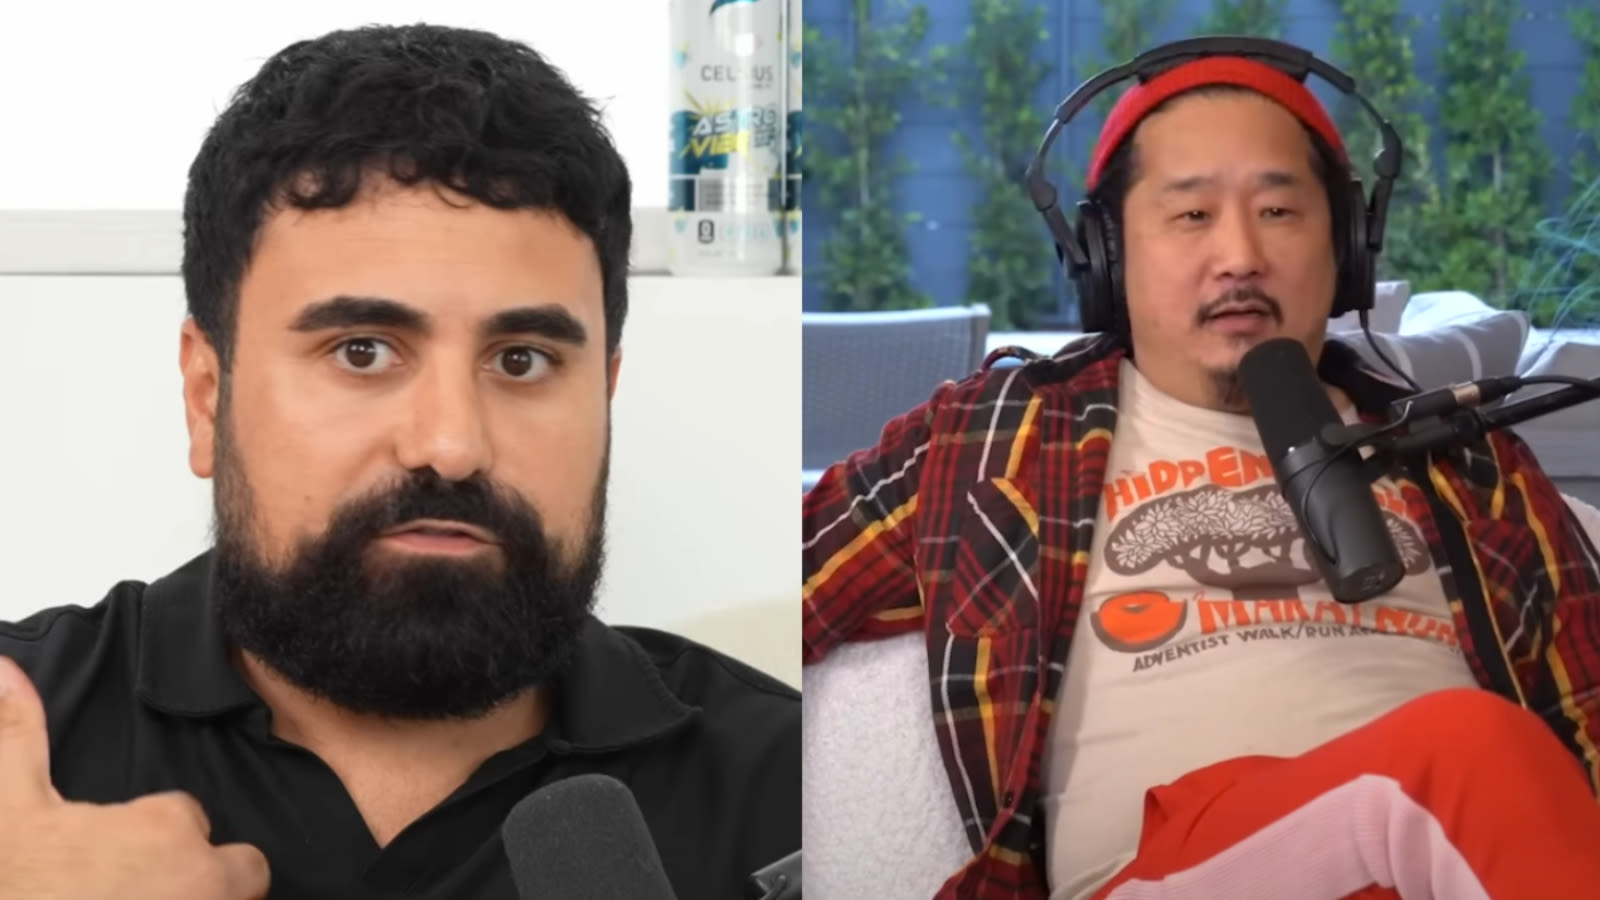 George Janko accuses comedian Bobby Lee of sexually harassing him on IMPAULSIVE podcast - Dexerto